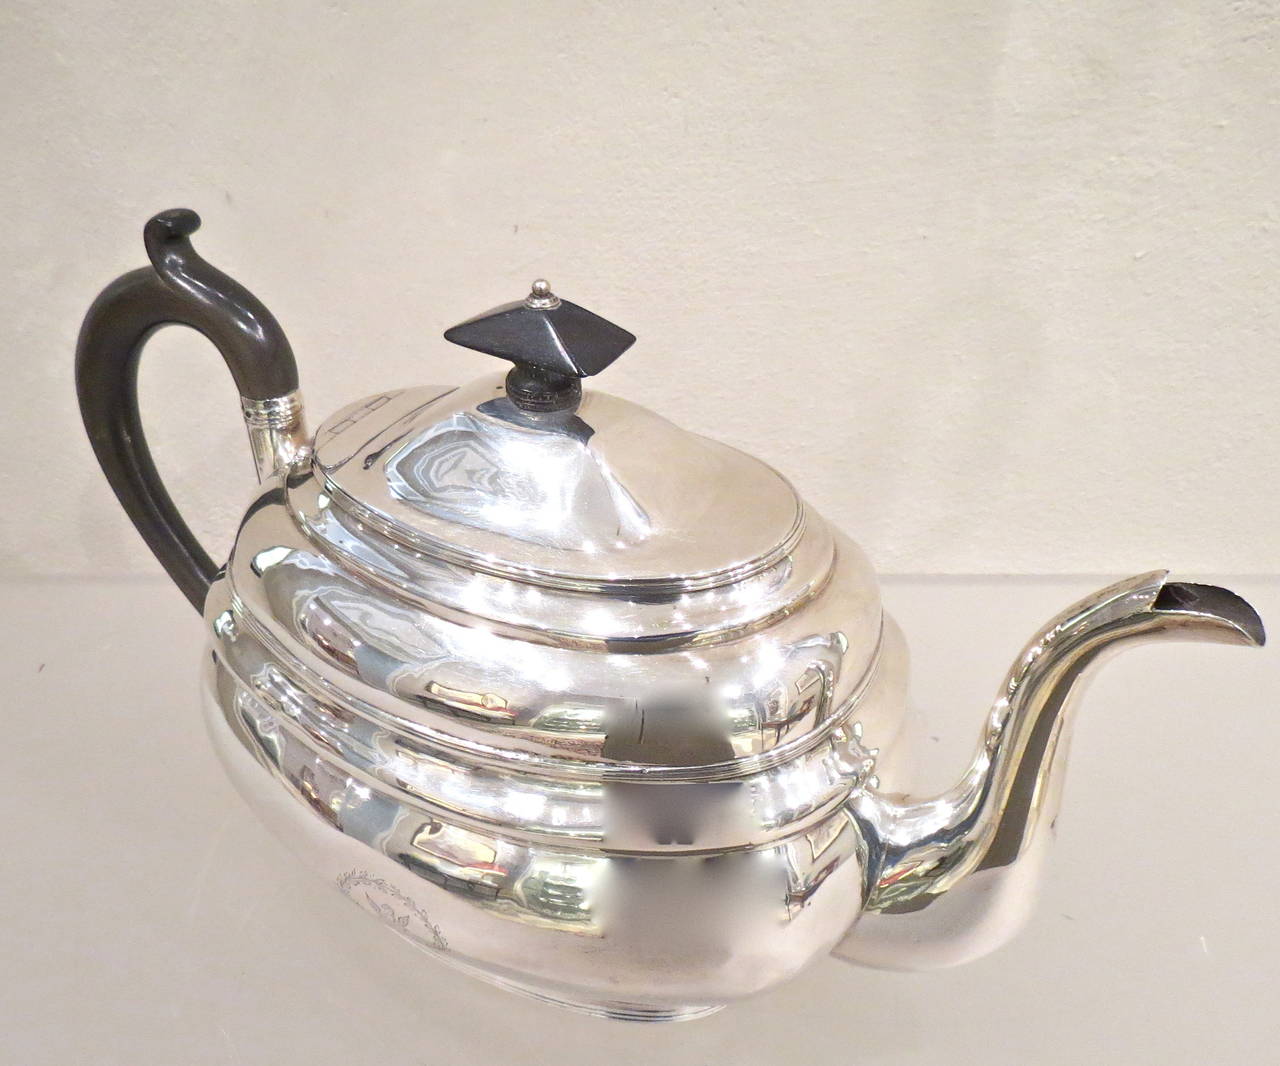 An antique silver teapot manufactured in Dublin in 1805 by Robert Breading. Harmoniously shaped, with a winged horse crest engraved on the lower section. Handle and top are made in ebony wood.